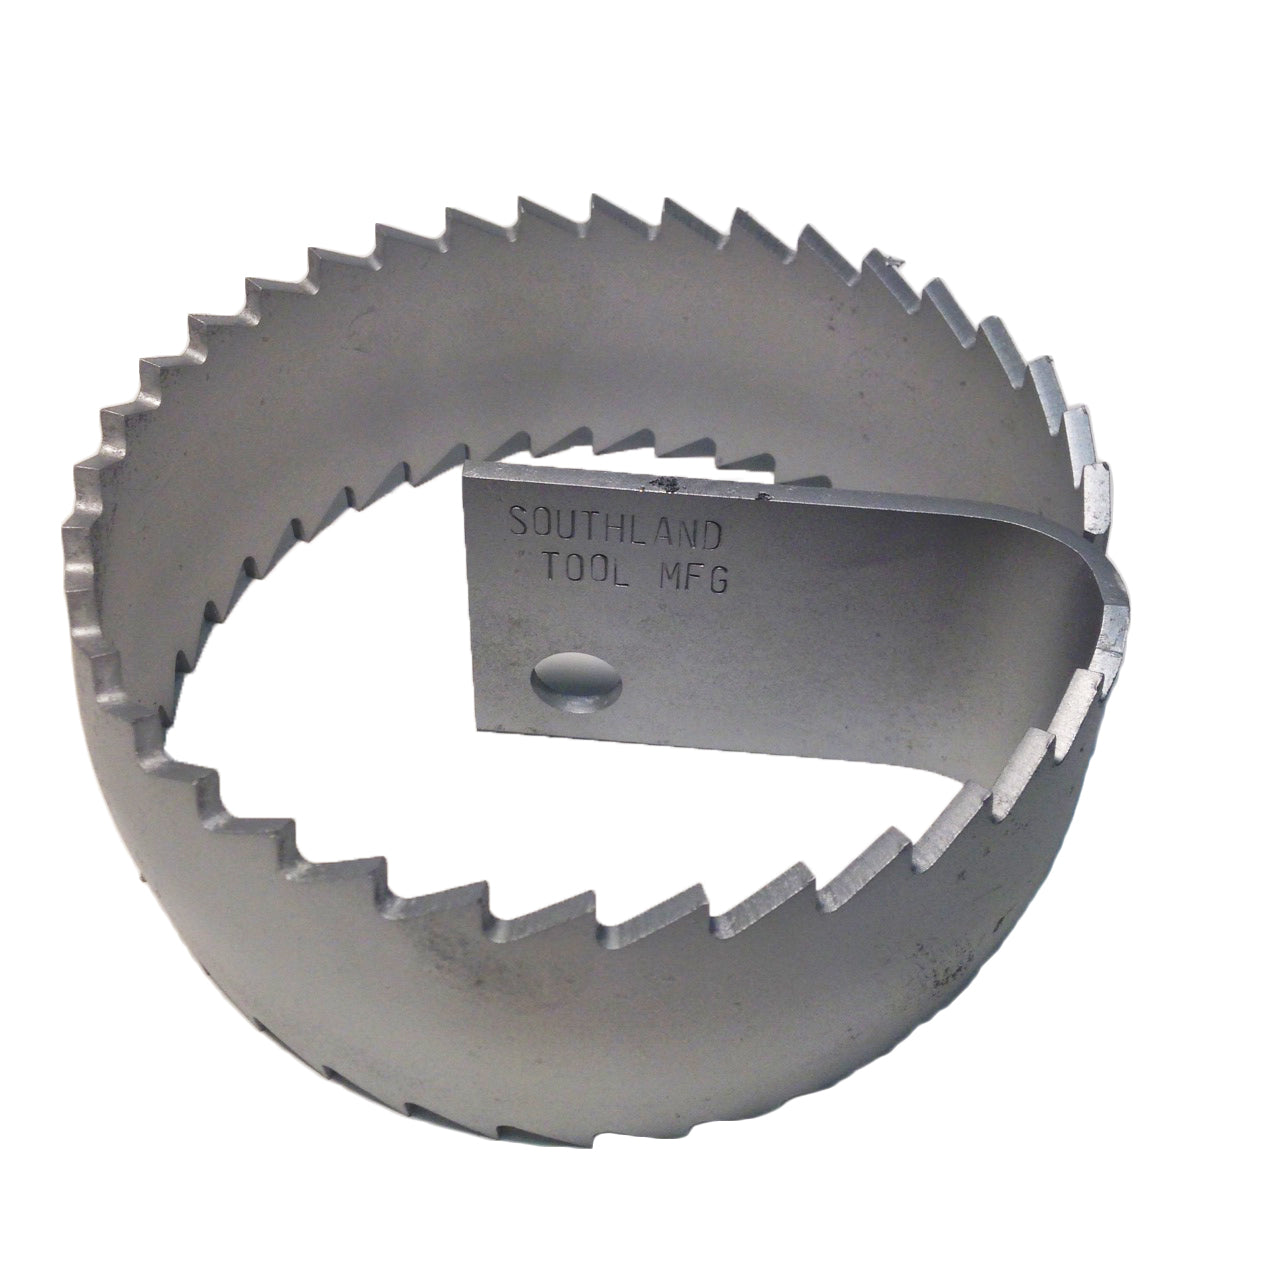 Standard Duty Concave Root Saw Blade